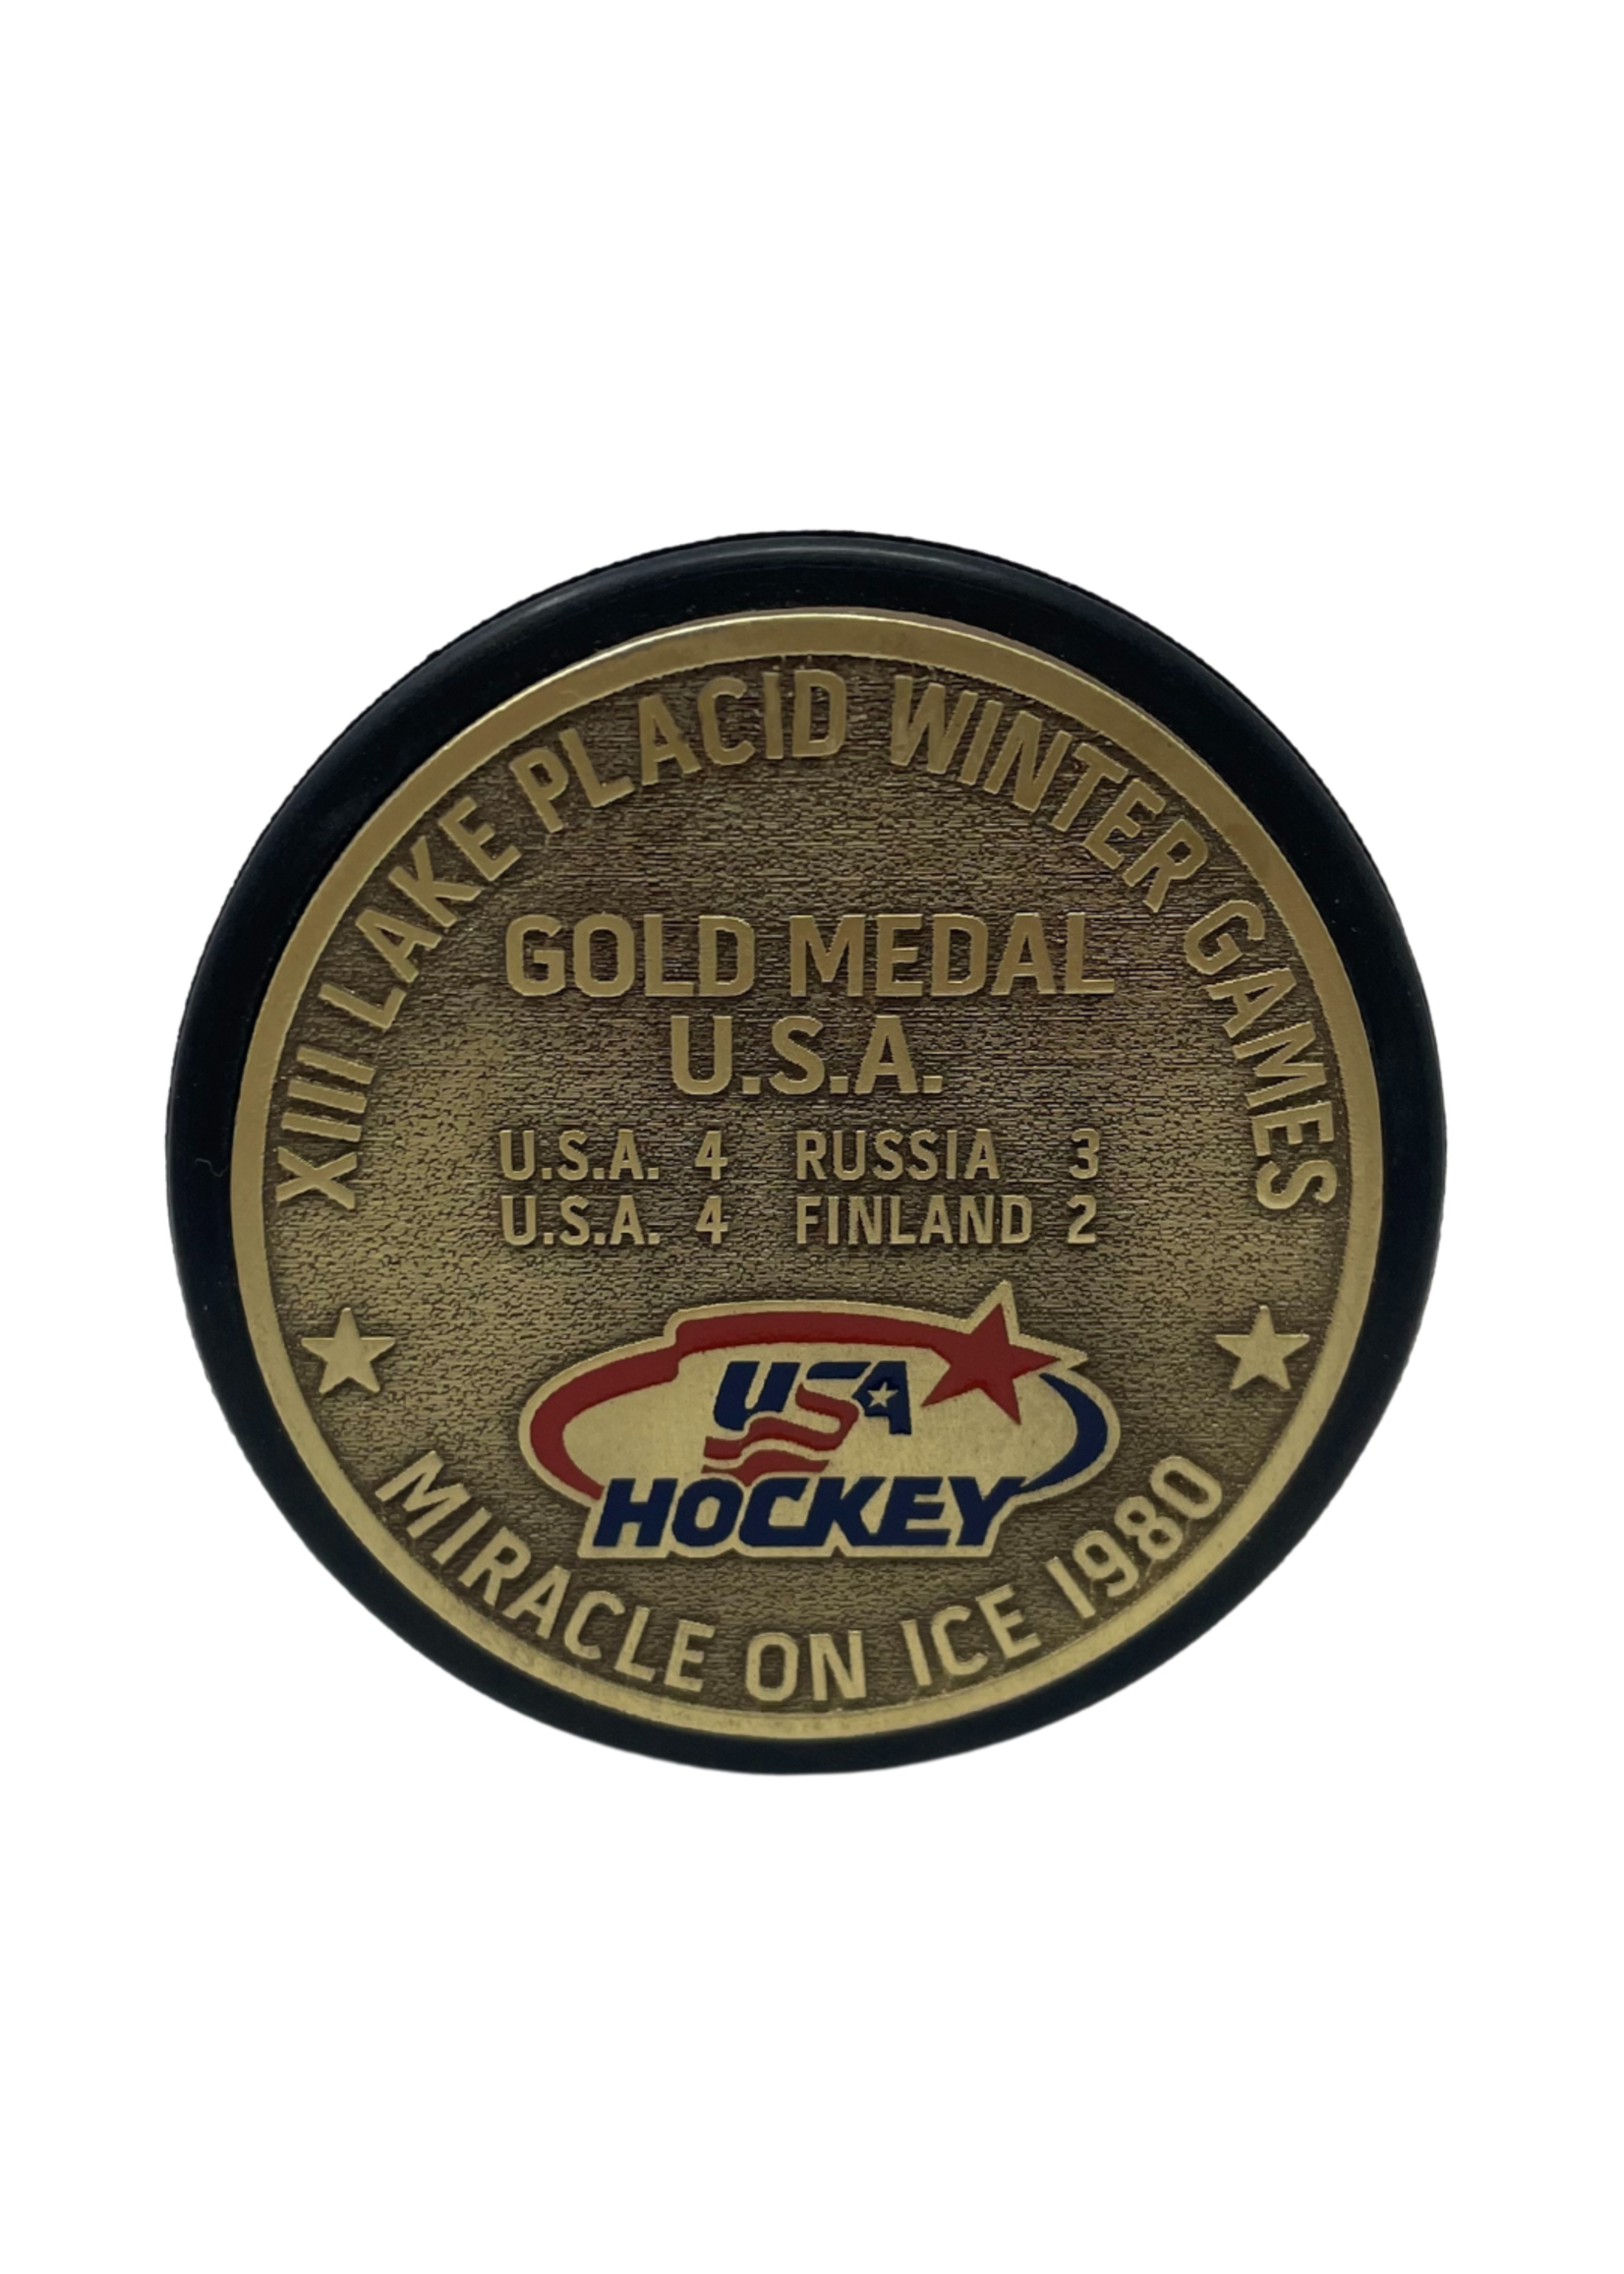 Miracle on Ice Gold Medal Puck